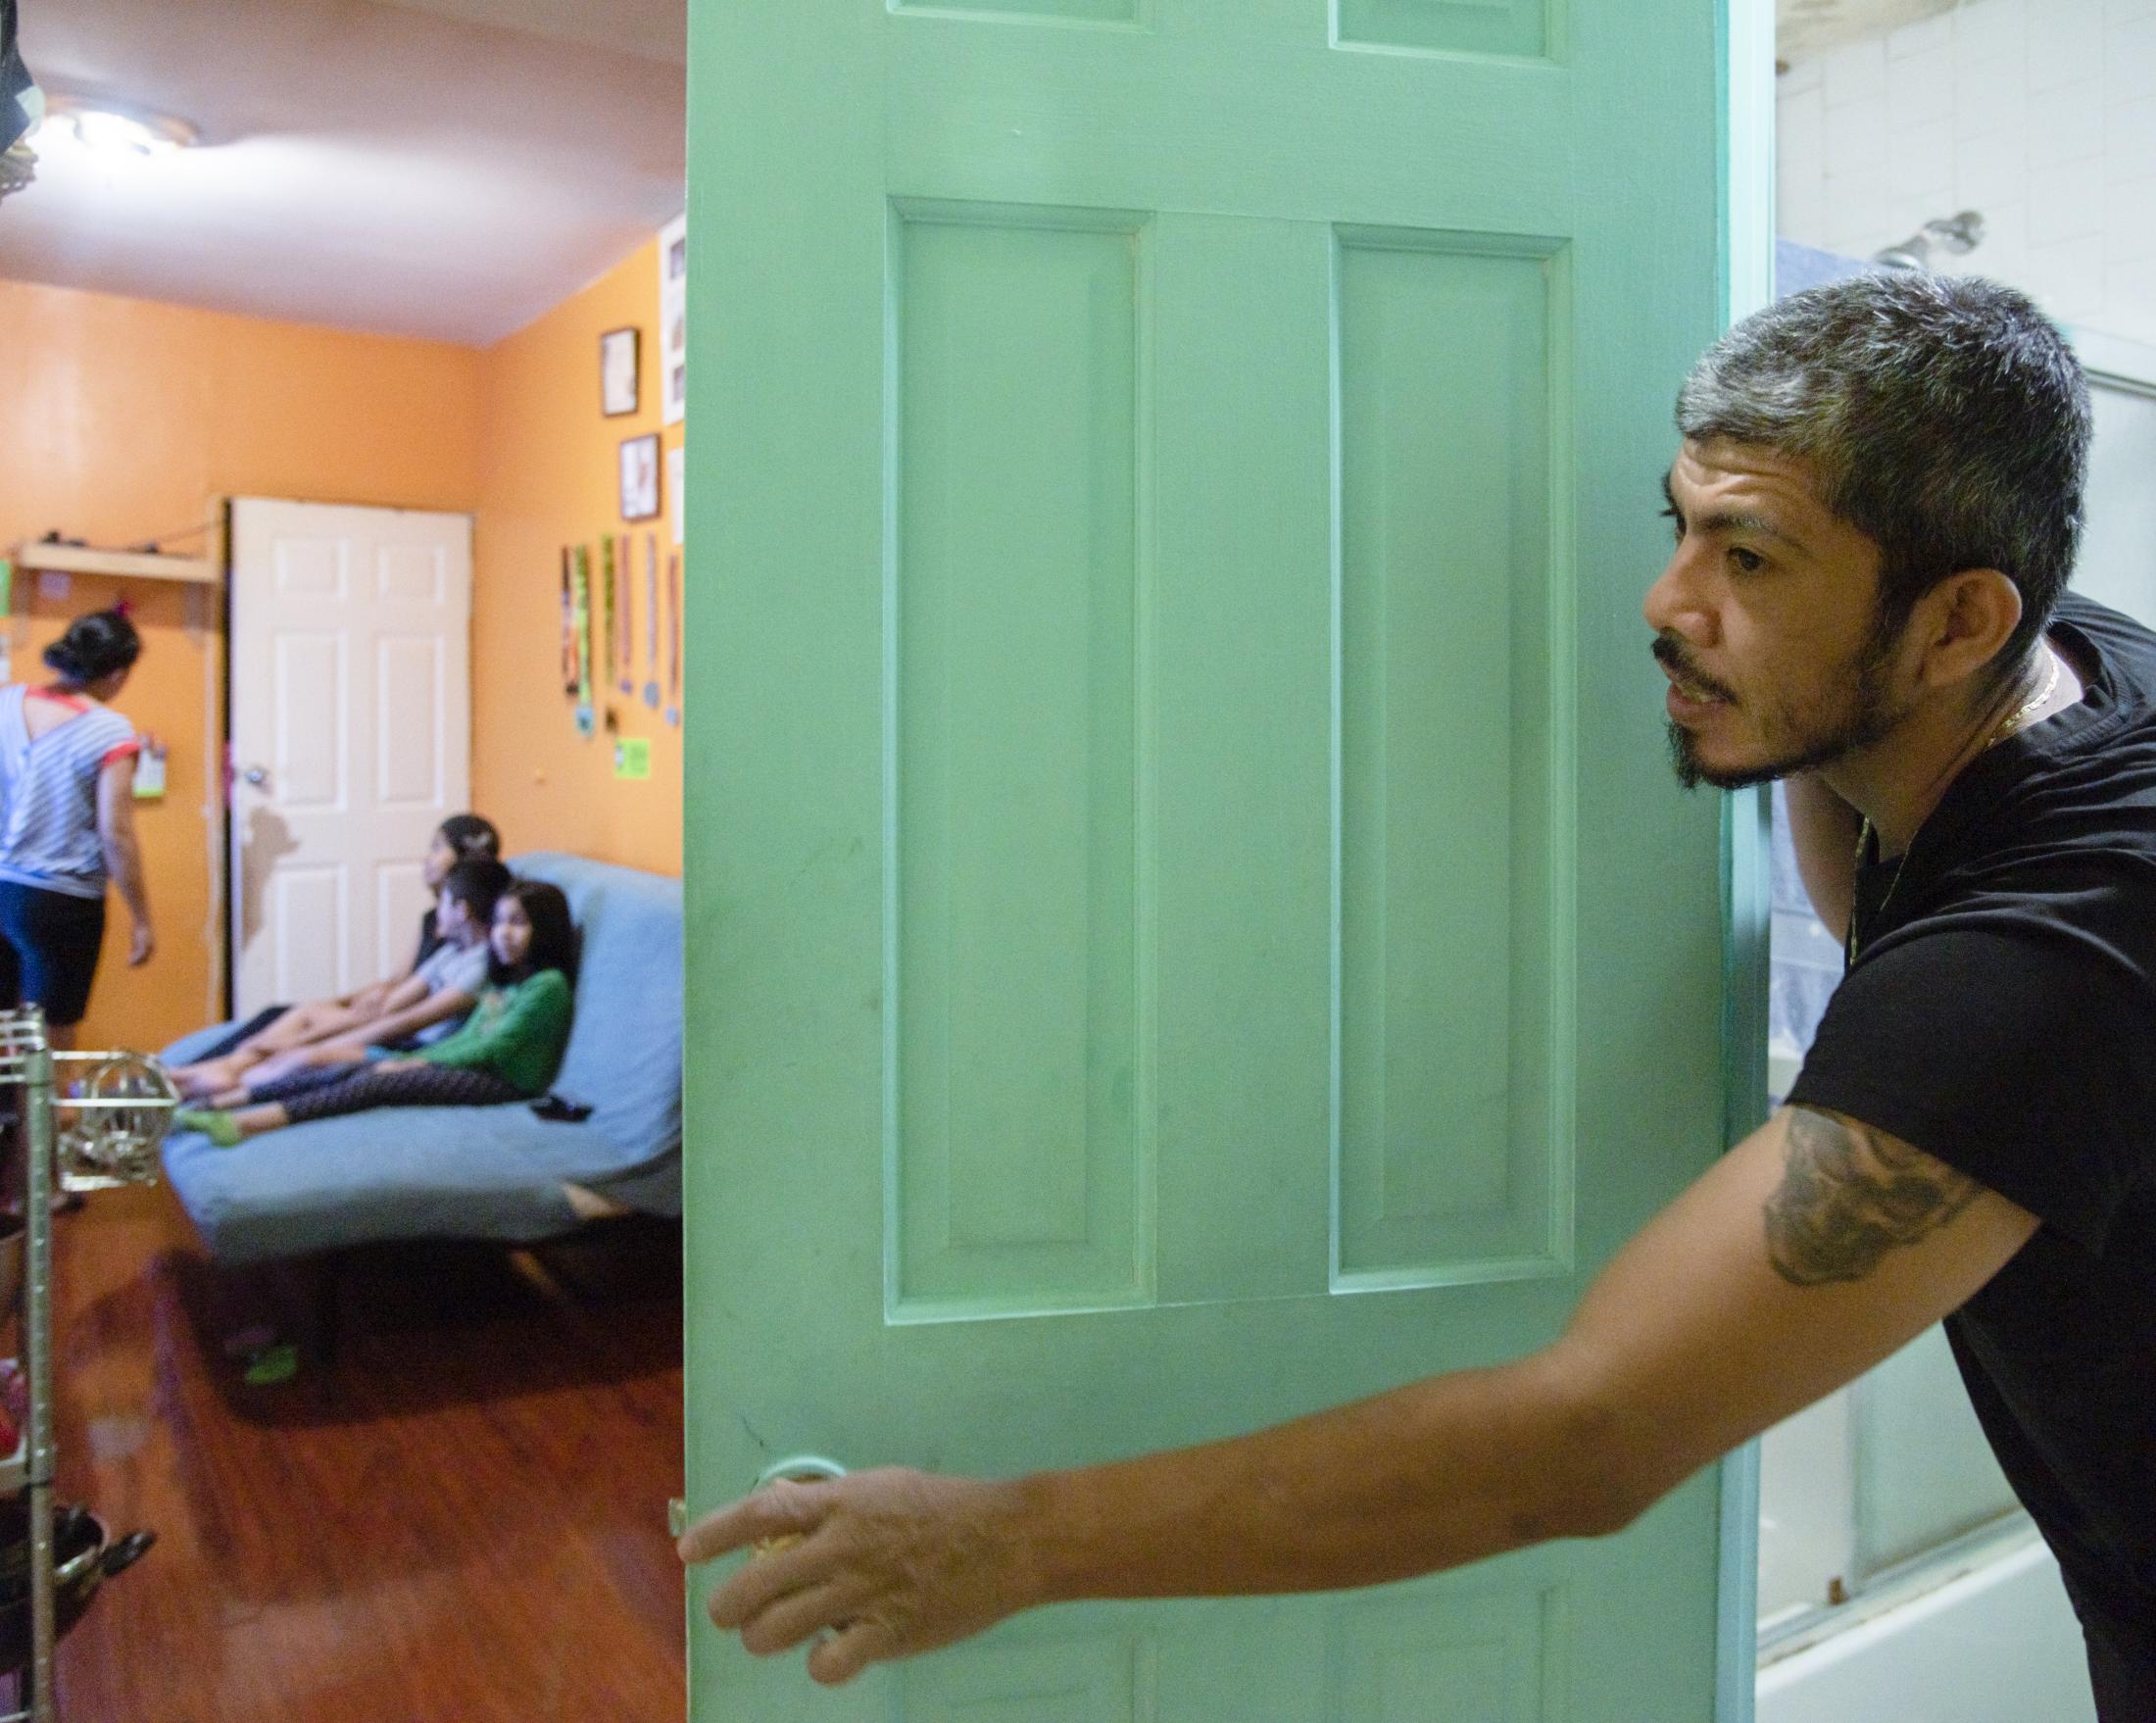 NYC Latino food delivery workers during COVID - Jaciel waits for towels and clean clothes while he is...